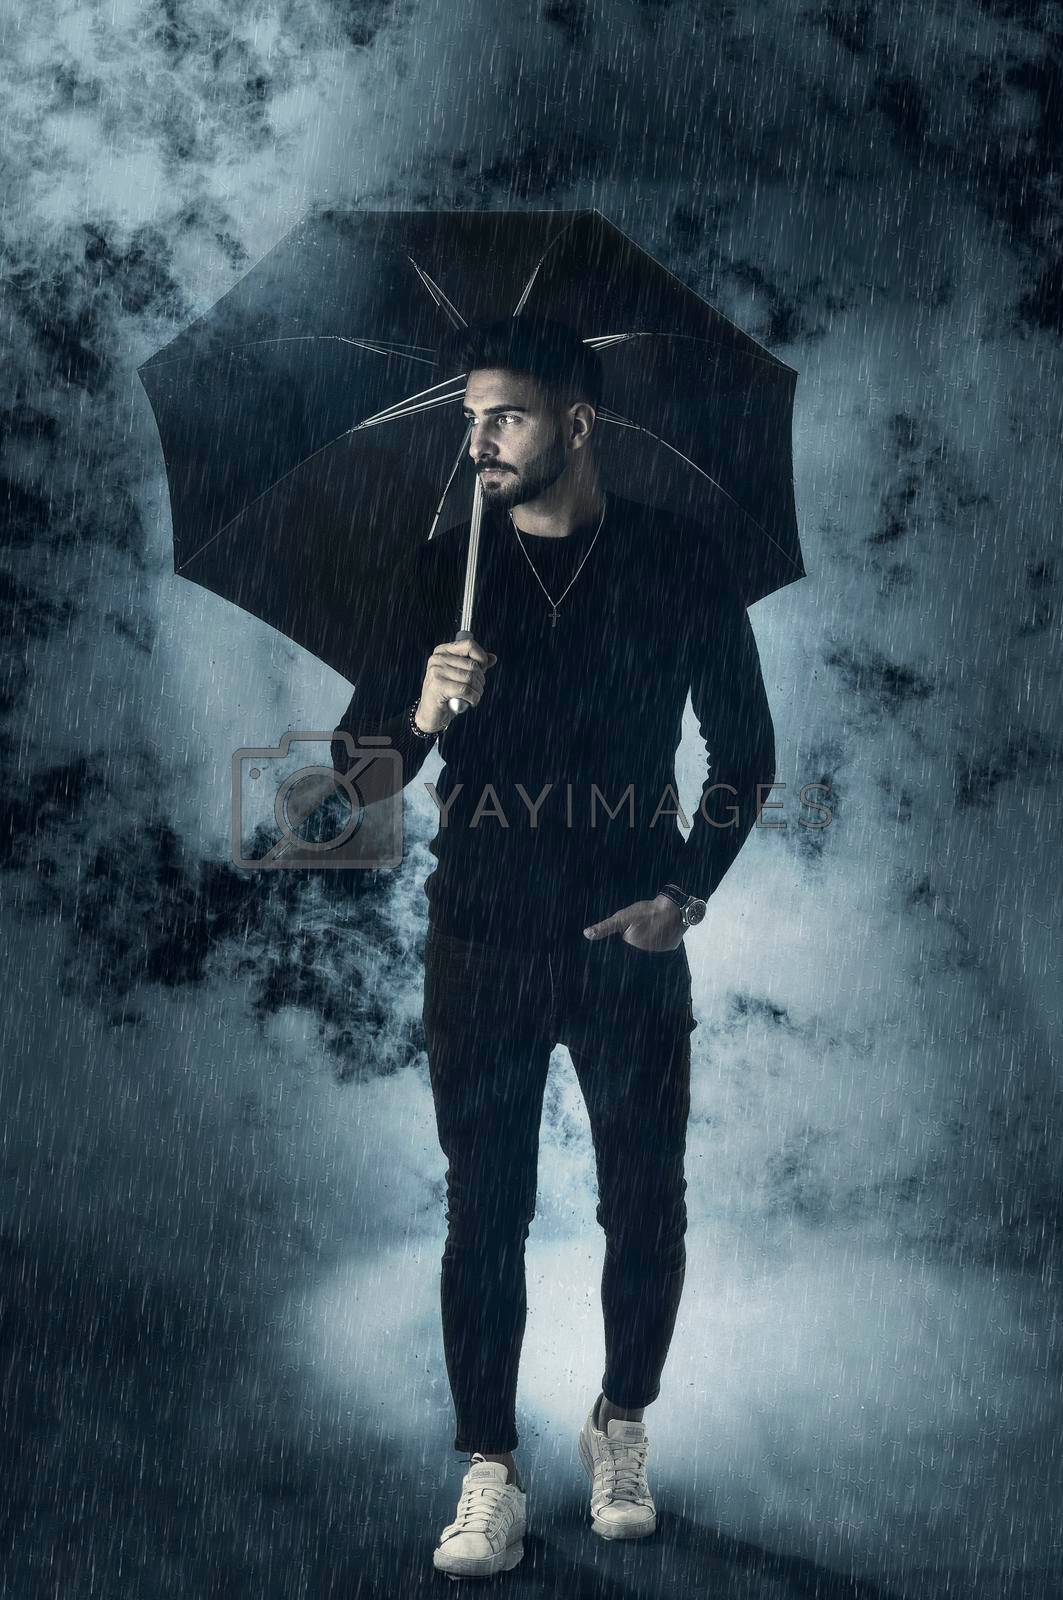 Royalty free image of Young man under an umbrella, with rain and fog around by artofphoto